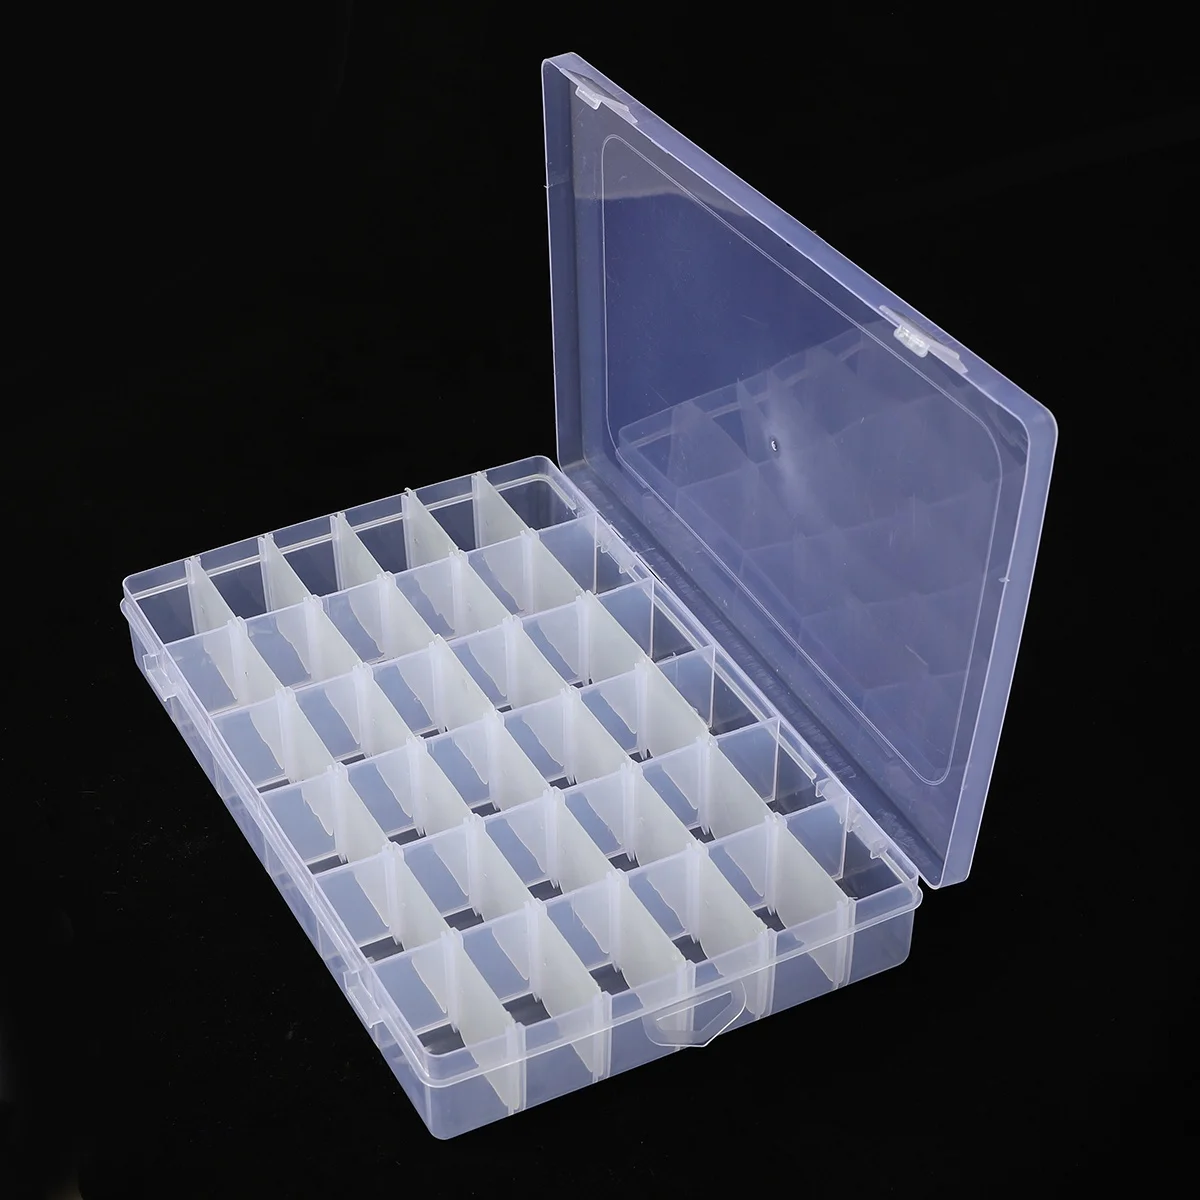 36 Grids Embroidery Floss Storage Box with Floss Bobbins DIY Sewing Tools